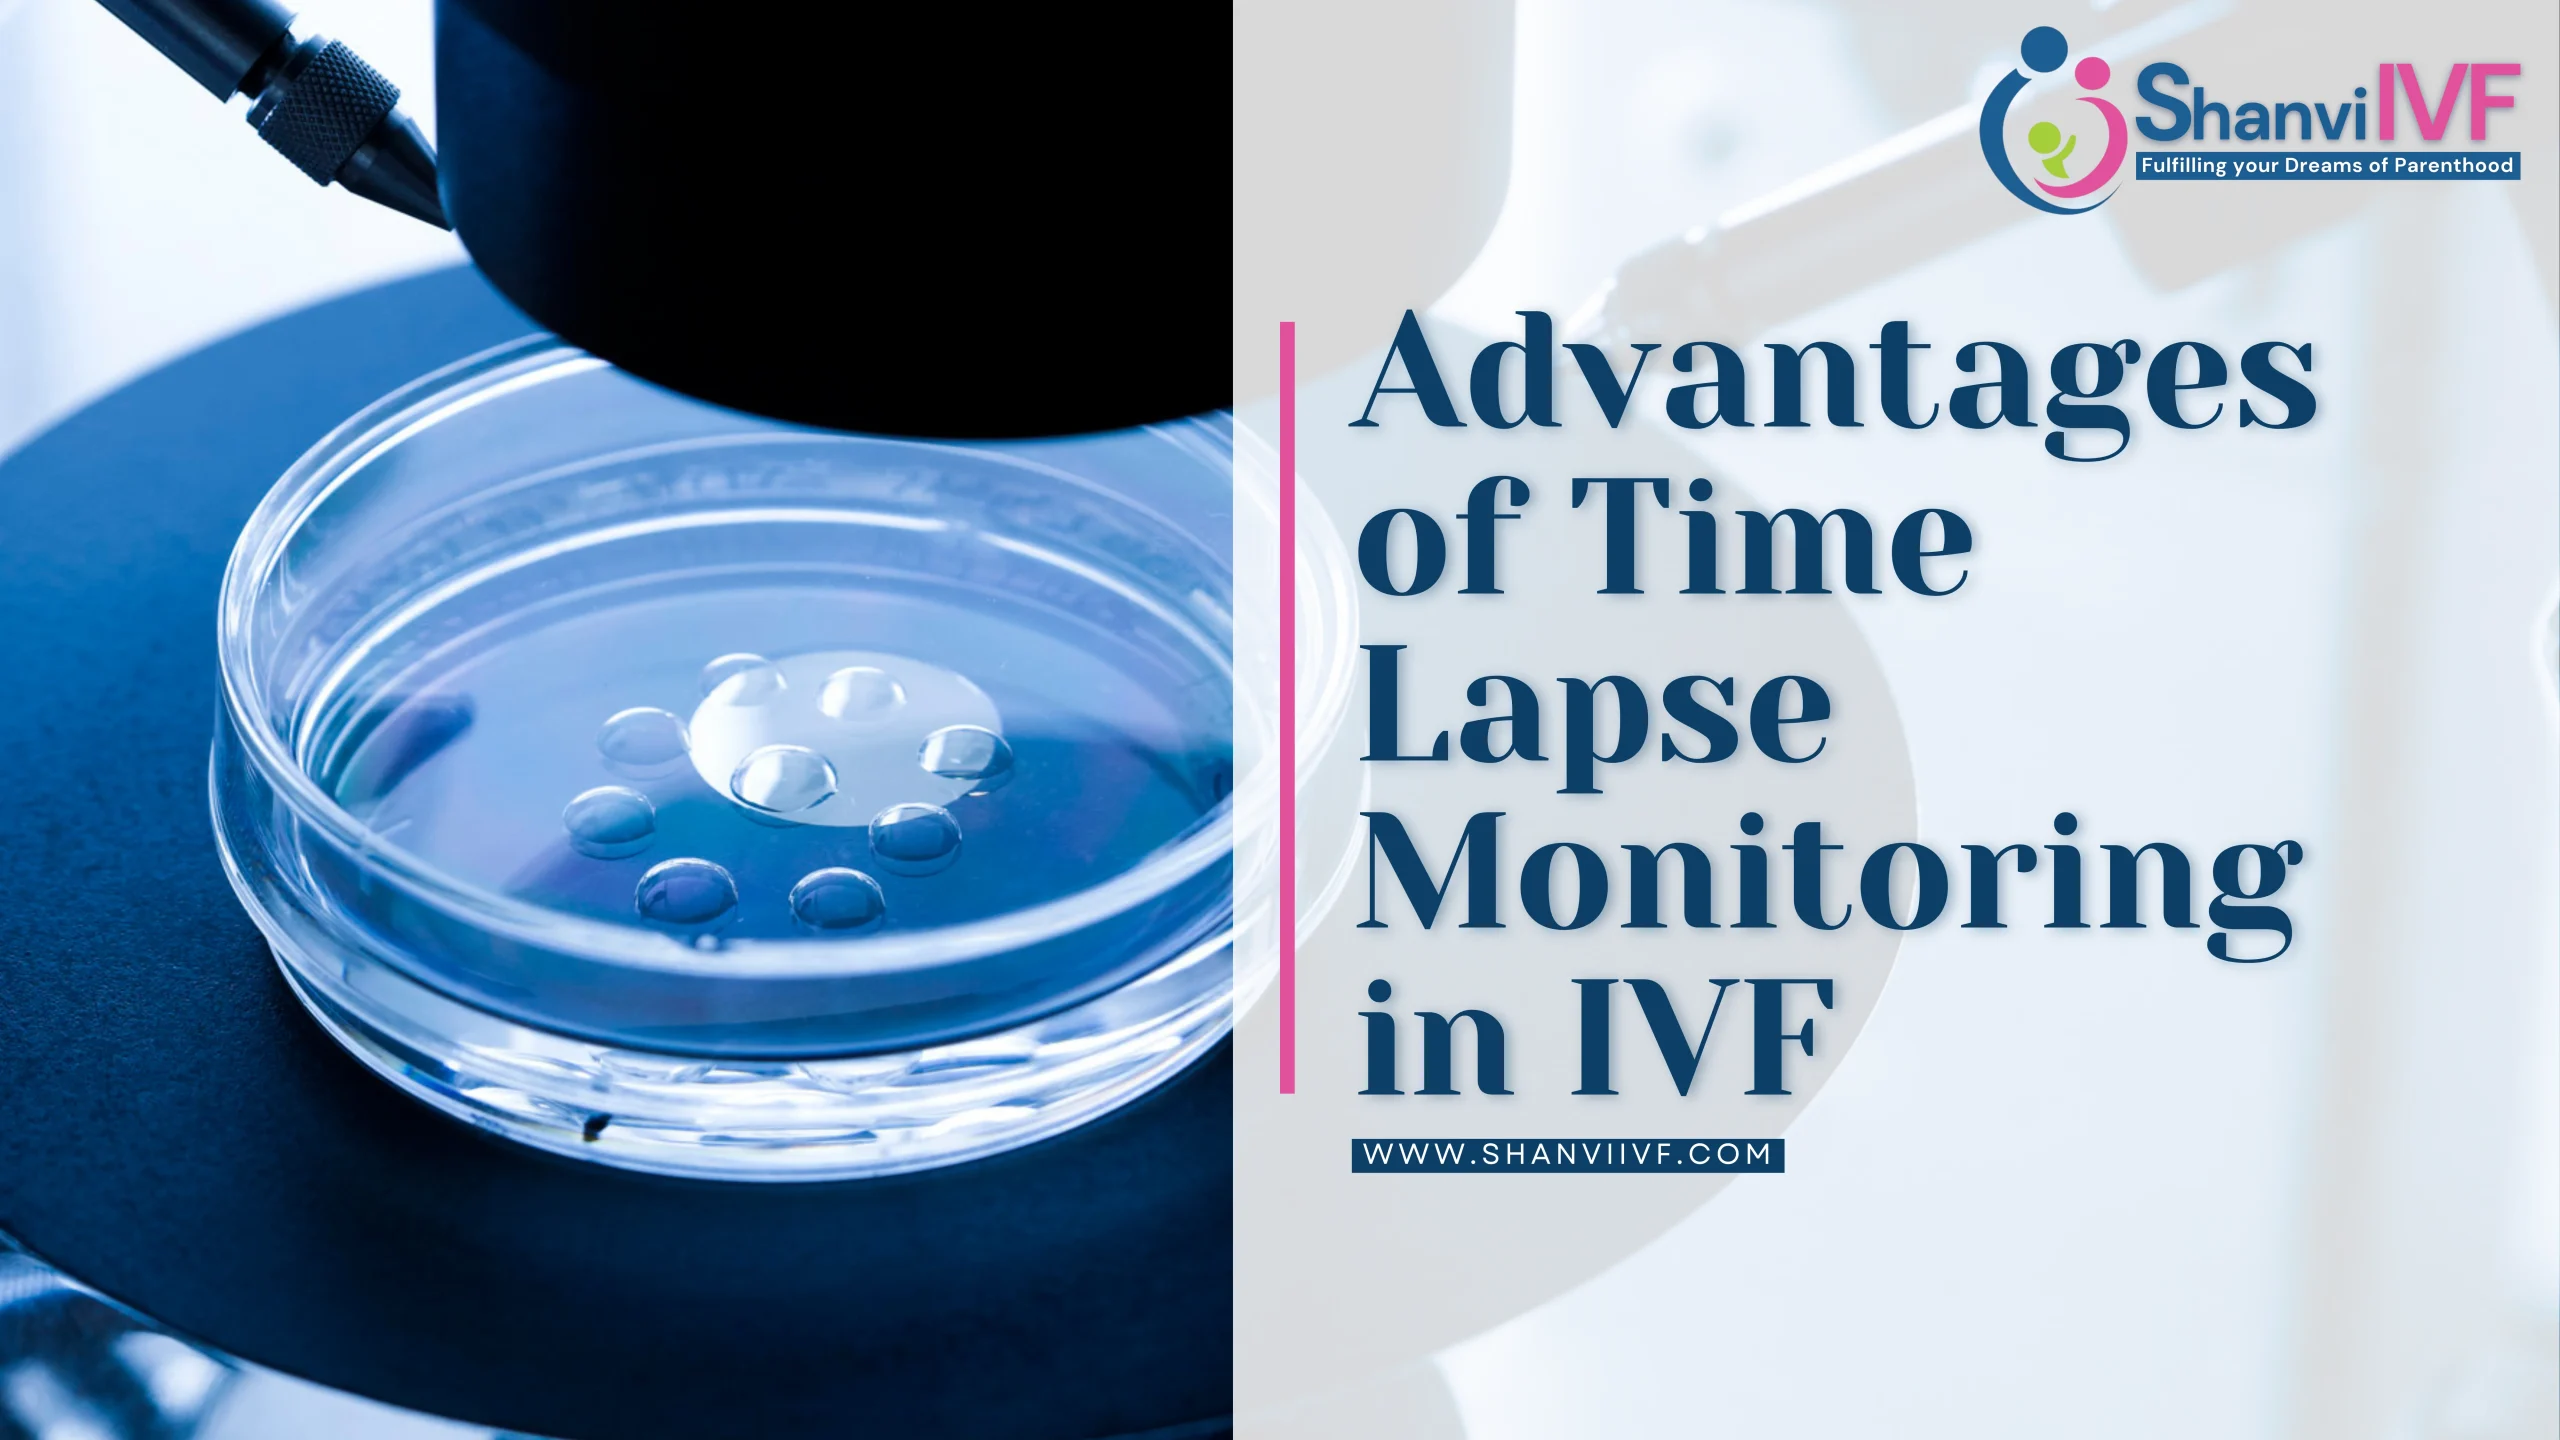 Advantages of Time Lapse Monitoring in IVF